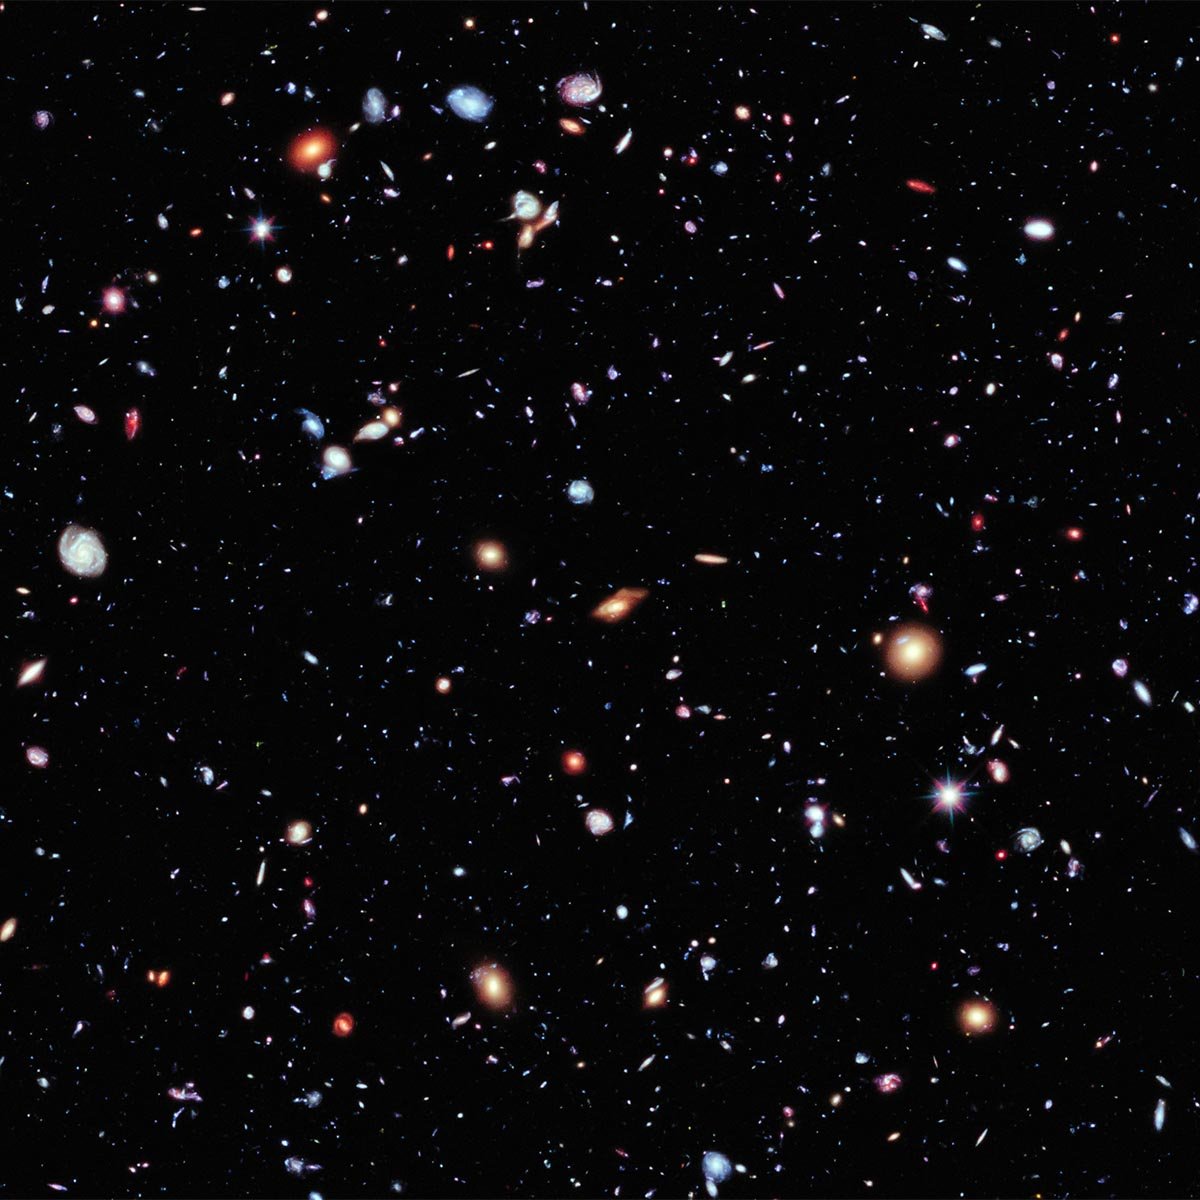 Image of Our Universe by NASA